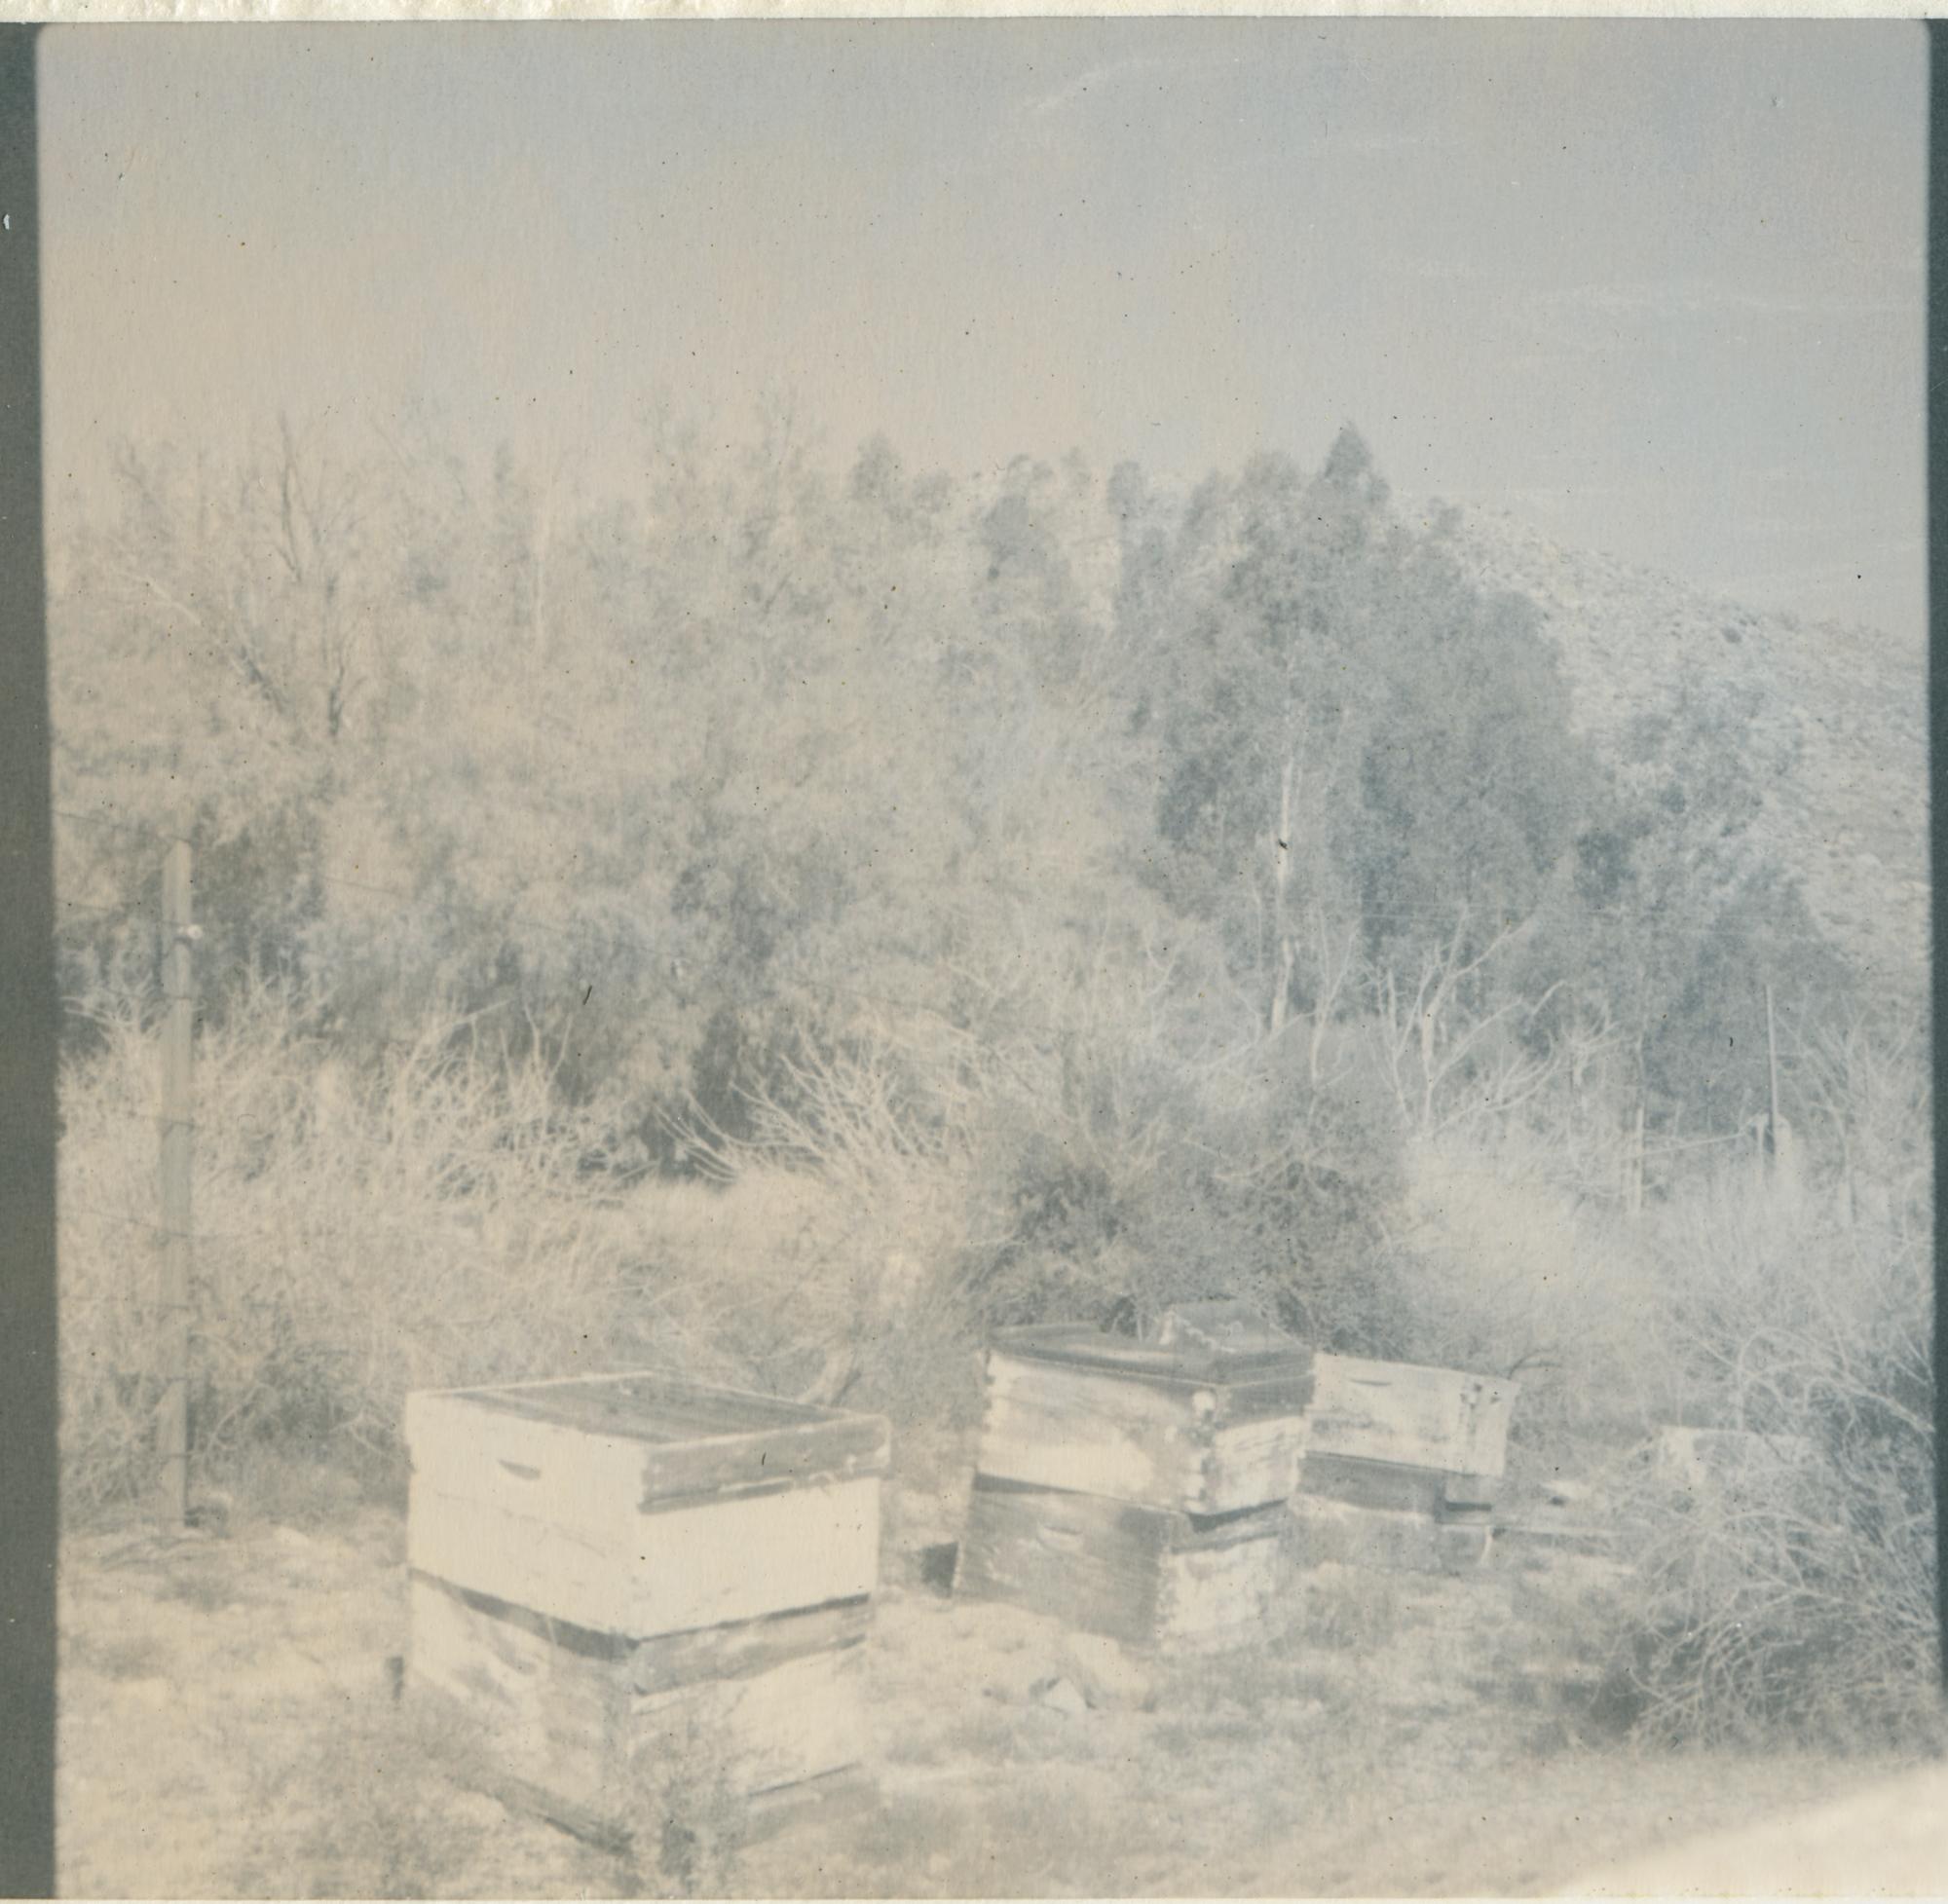 Deserted Bee Boxes (California Dreaming) - Contemporary, 21st Century, Polaroid